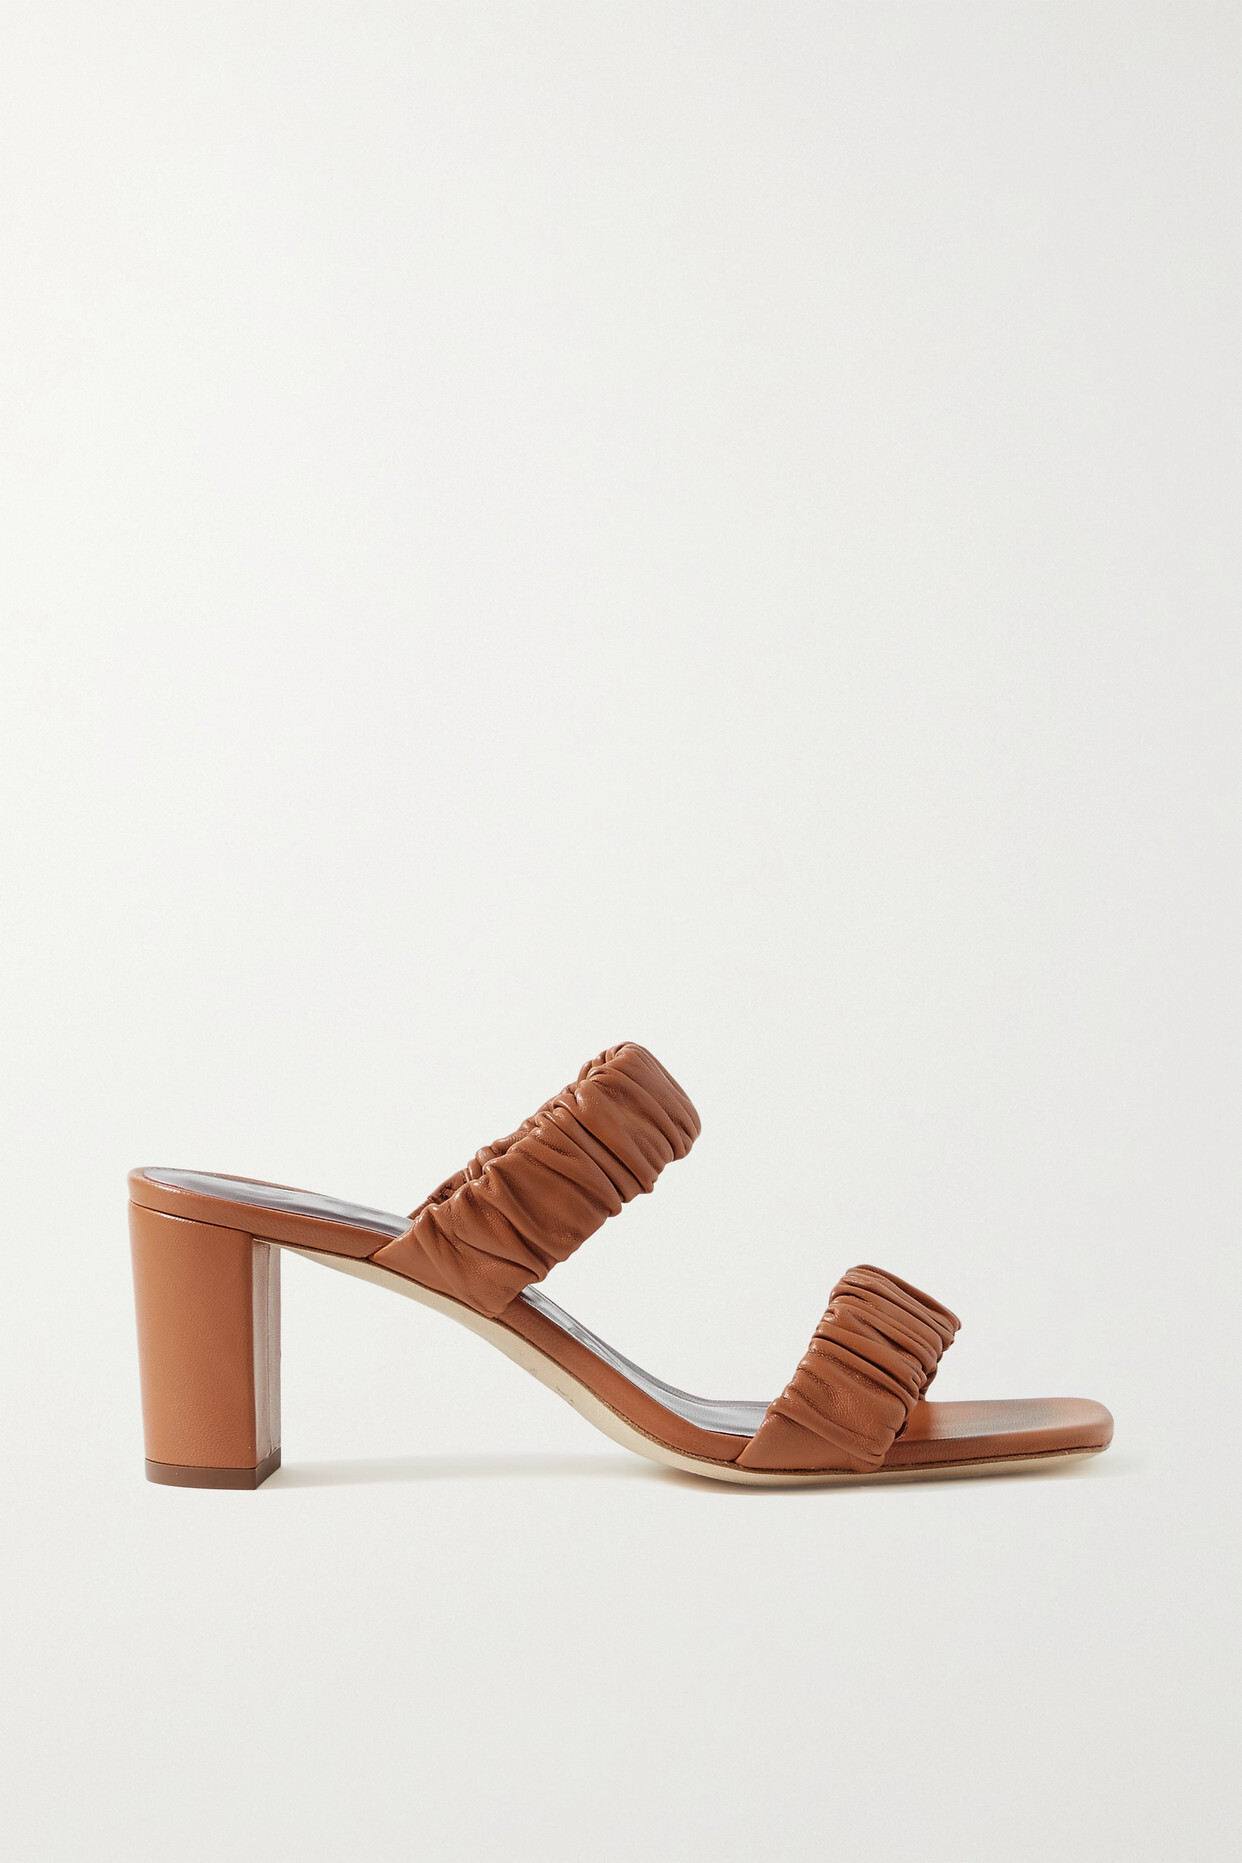 STAUD - Frankie Ruched Leather Sandals - Brown